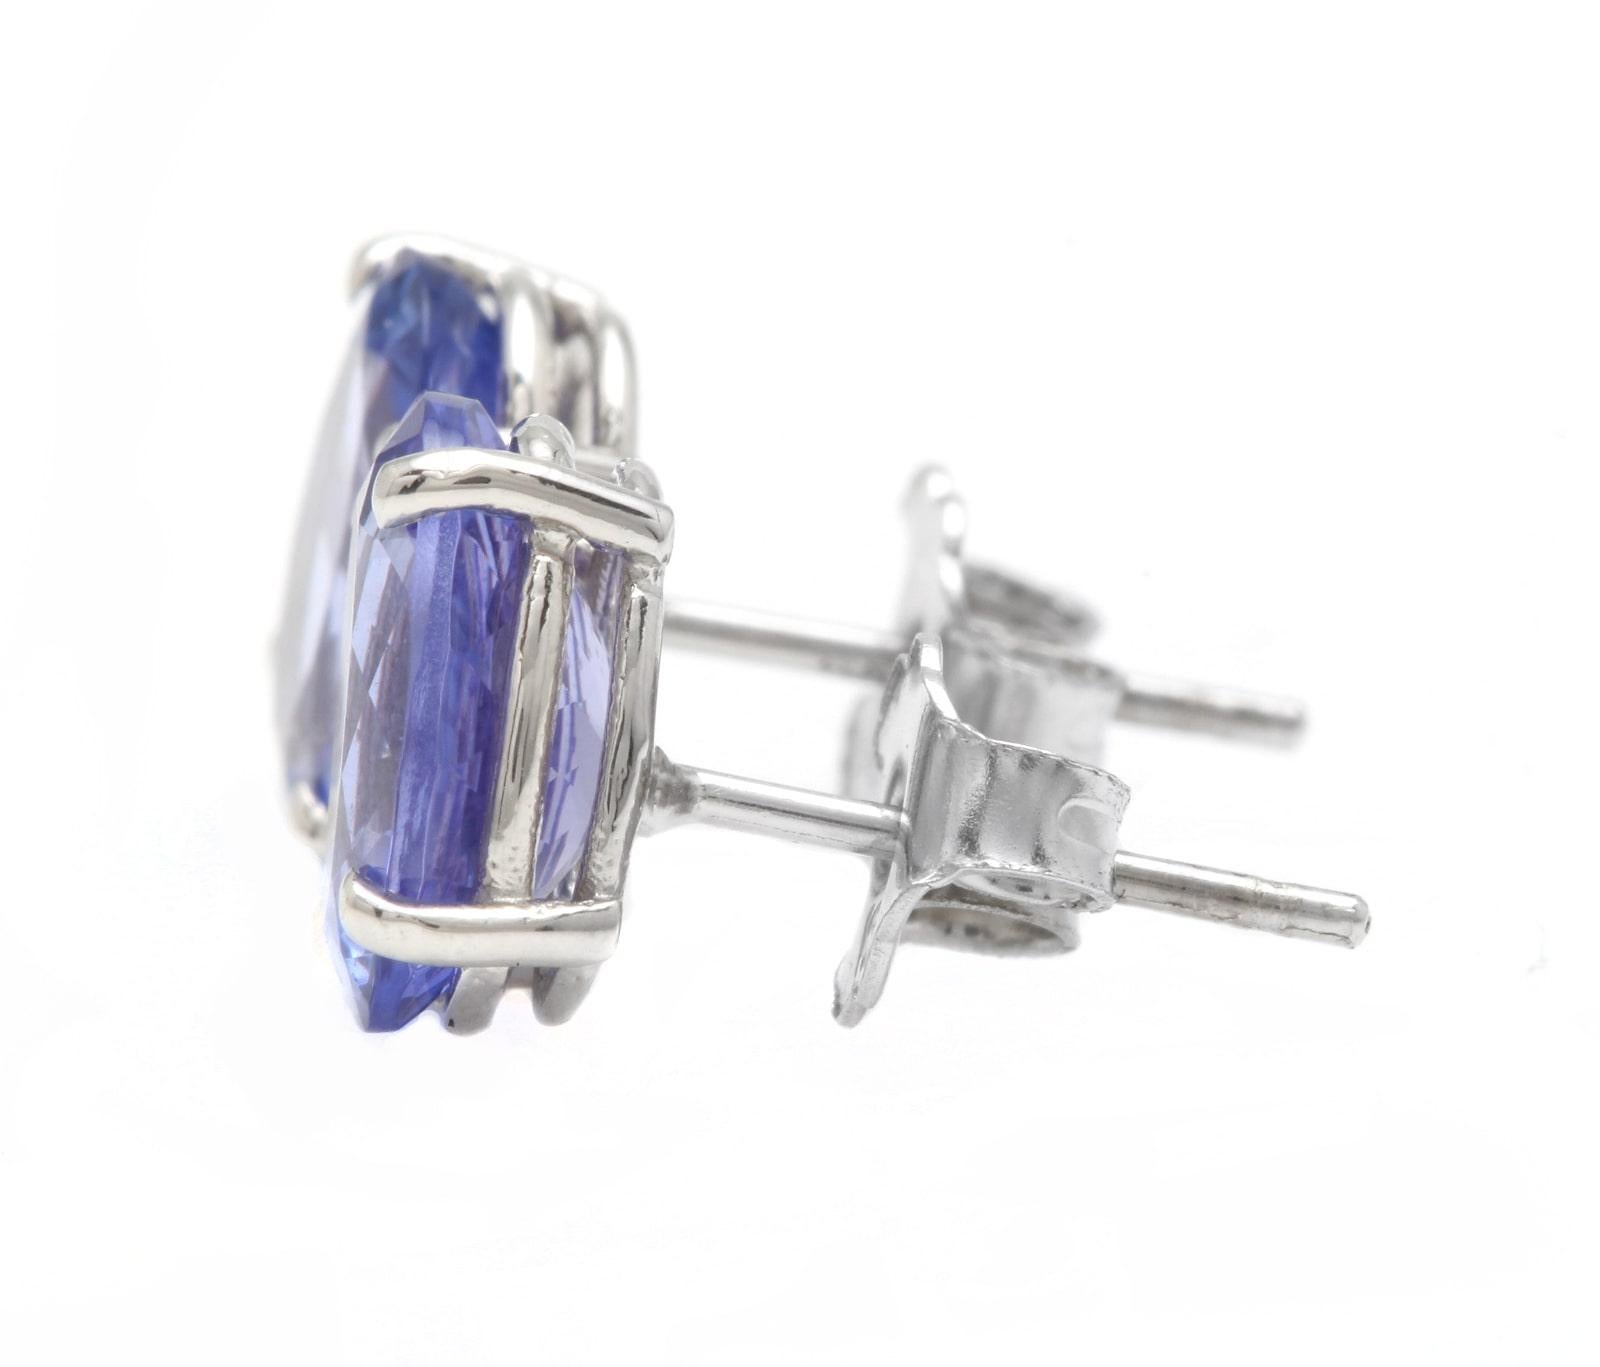 4.00 Carats Natural Tanzanite 14K Solid White Gold Stud Earrings

Amazing looking piece! 

Suggested Replacement Value: $3,000.00 

Total Natural Tanzanites Weight is: 4.00 Carats (both earrings) VVS

Tanzanite Measures: Approx. 9.00 x 7.00mm

Total